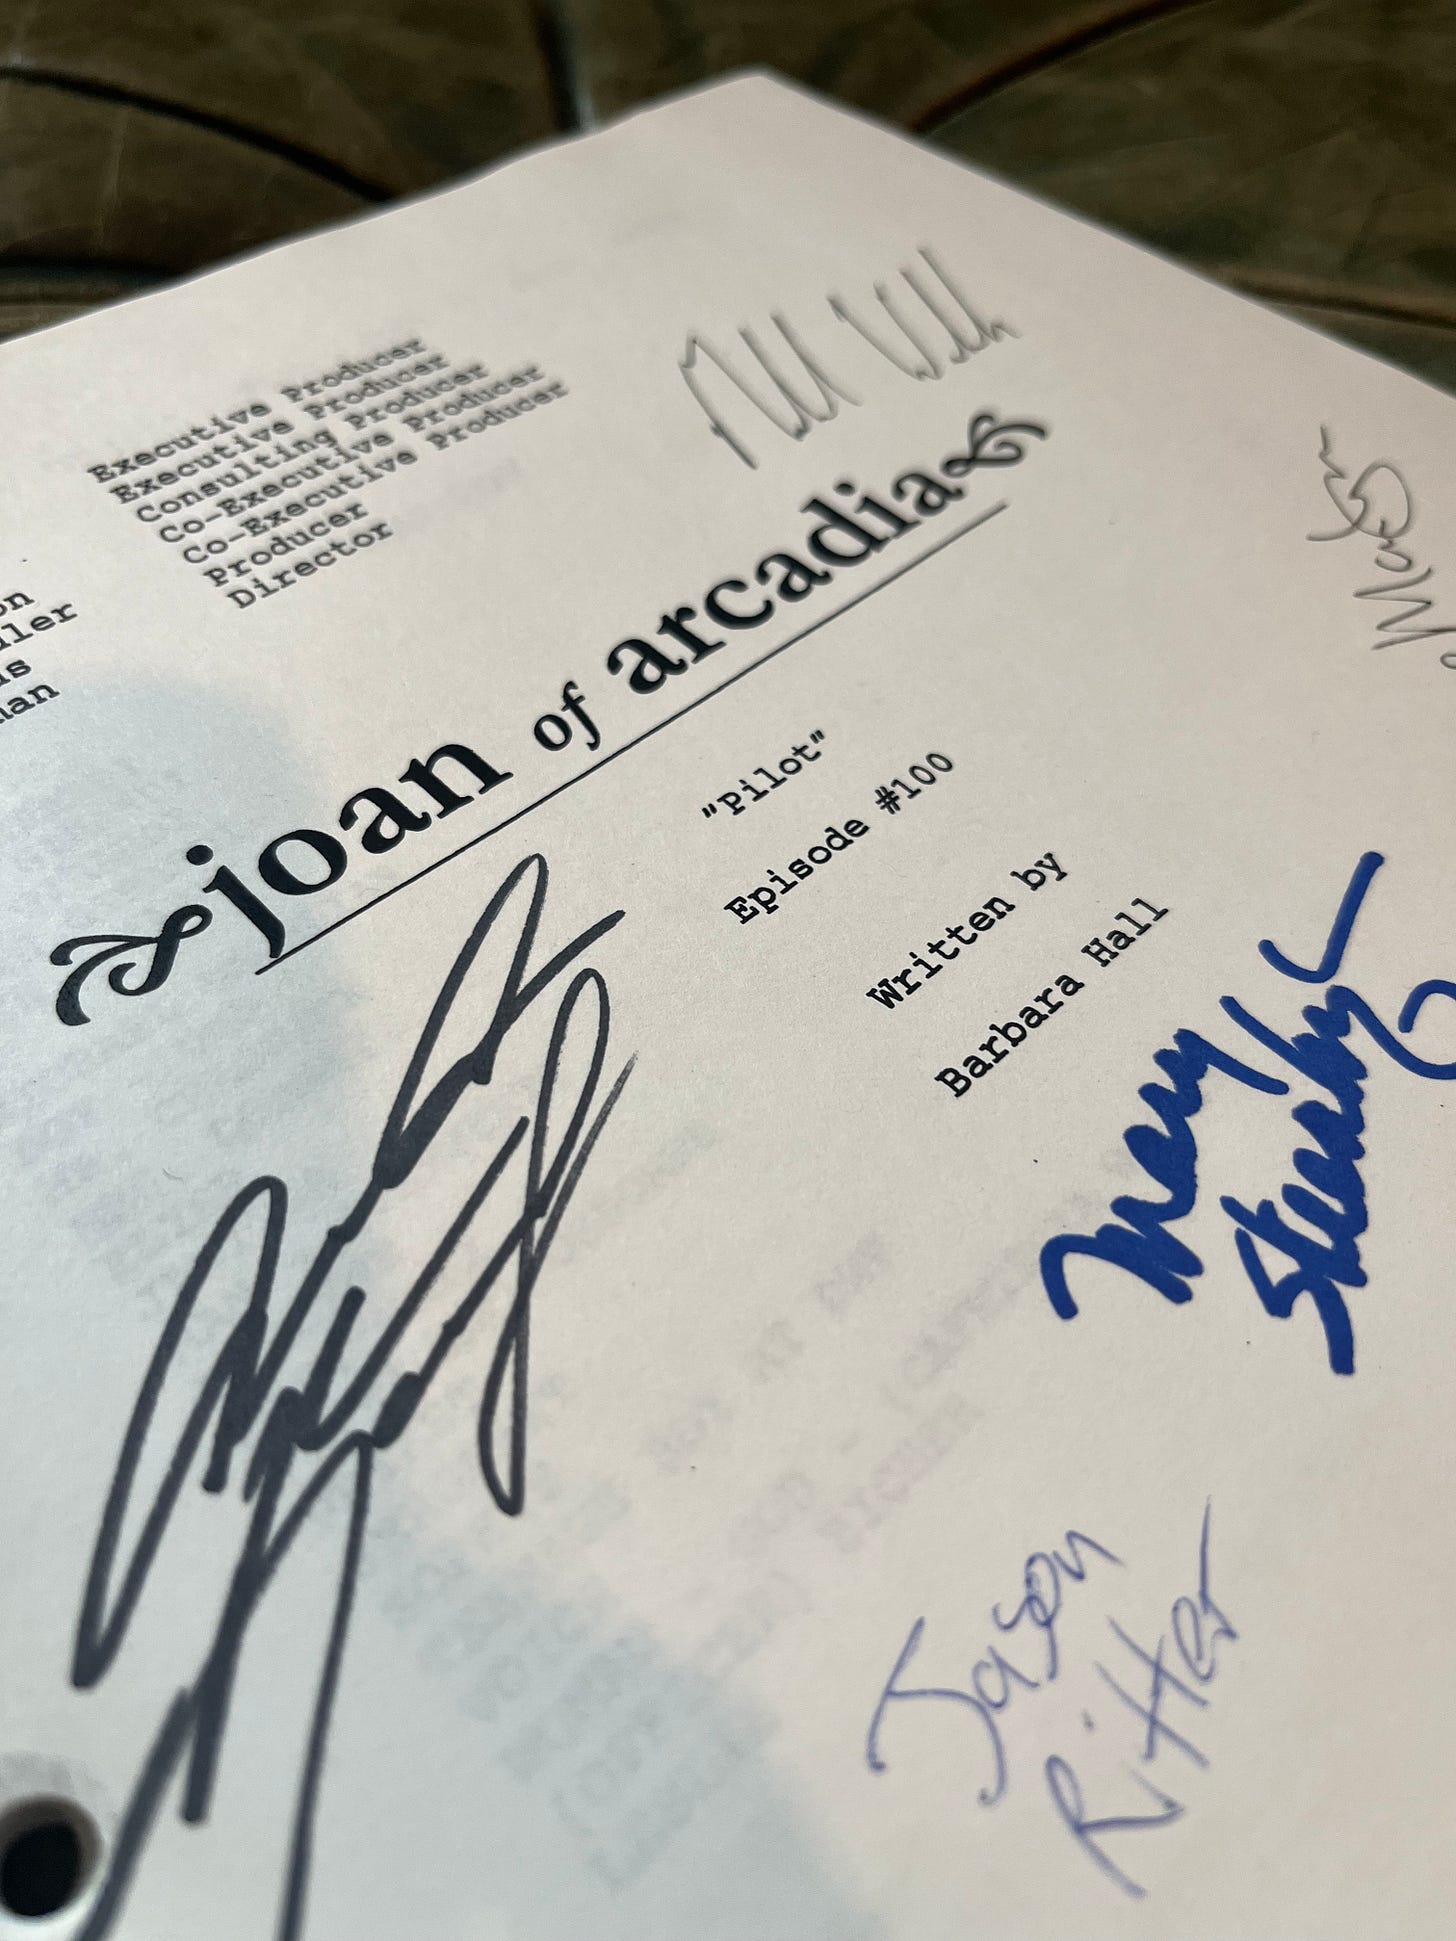 The title page of the "Joan of Arcadia" pilot script. Text reads: "Pilot - Episode #100 Written by Barbara Hall." Signatures of various cast members cover the page.